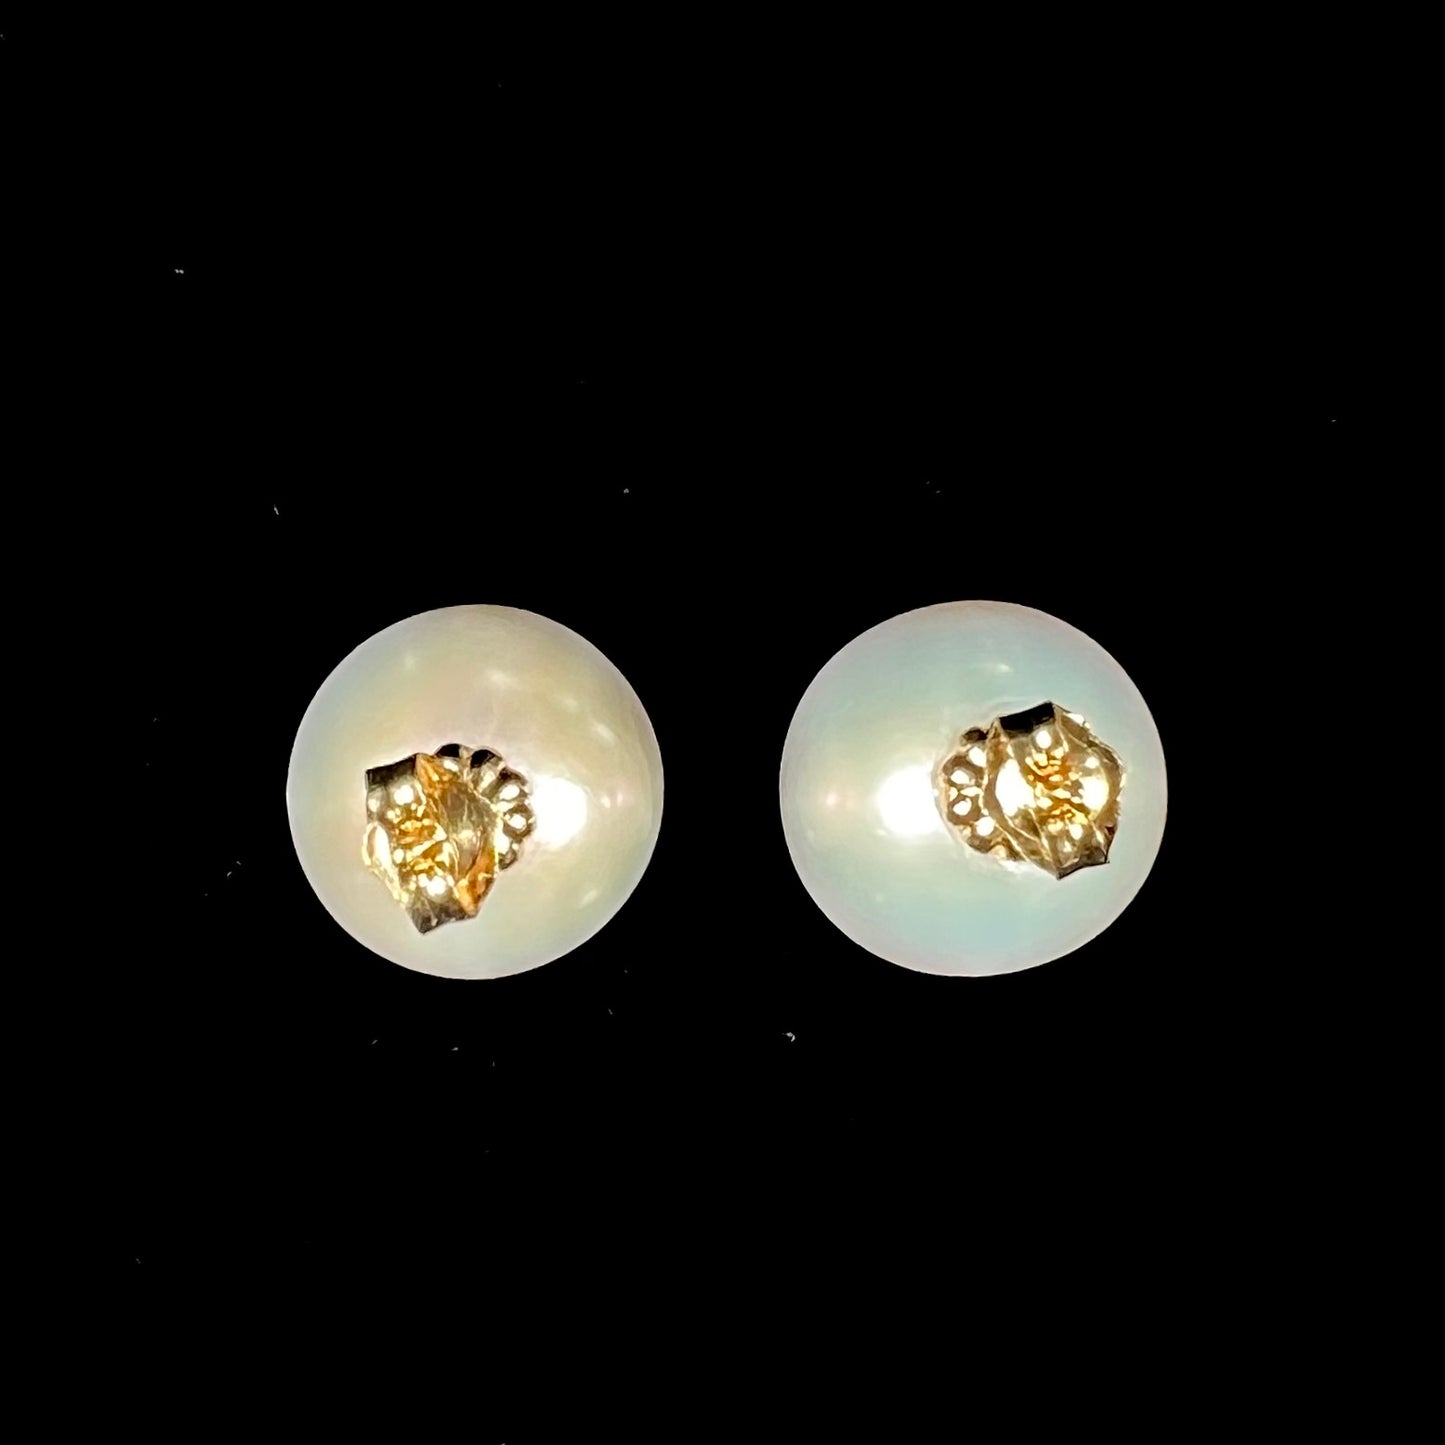 A pair of white South Seas pearl earrings with yellow gold push back friction posts.